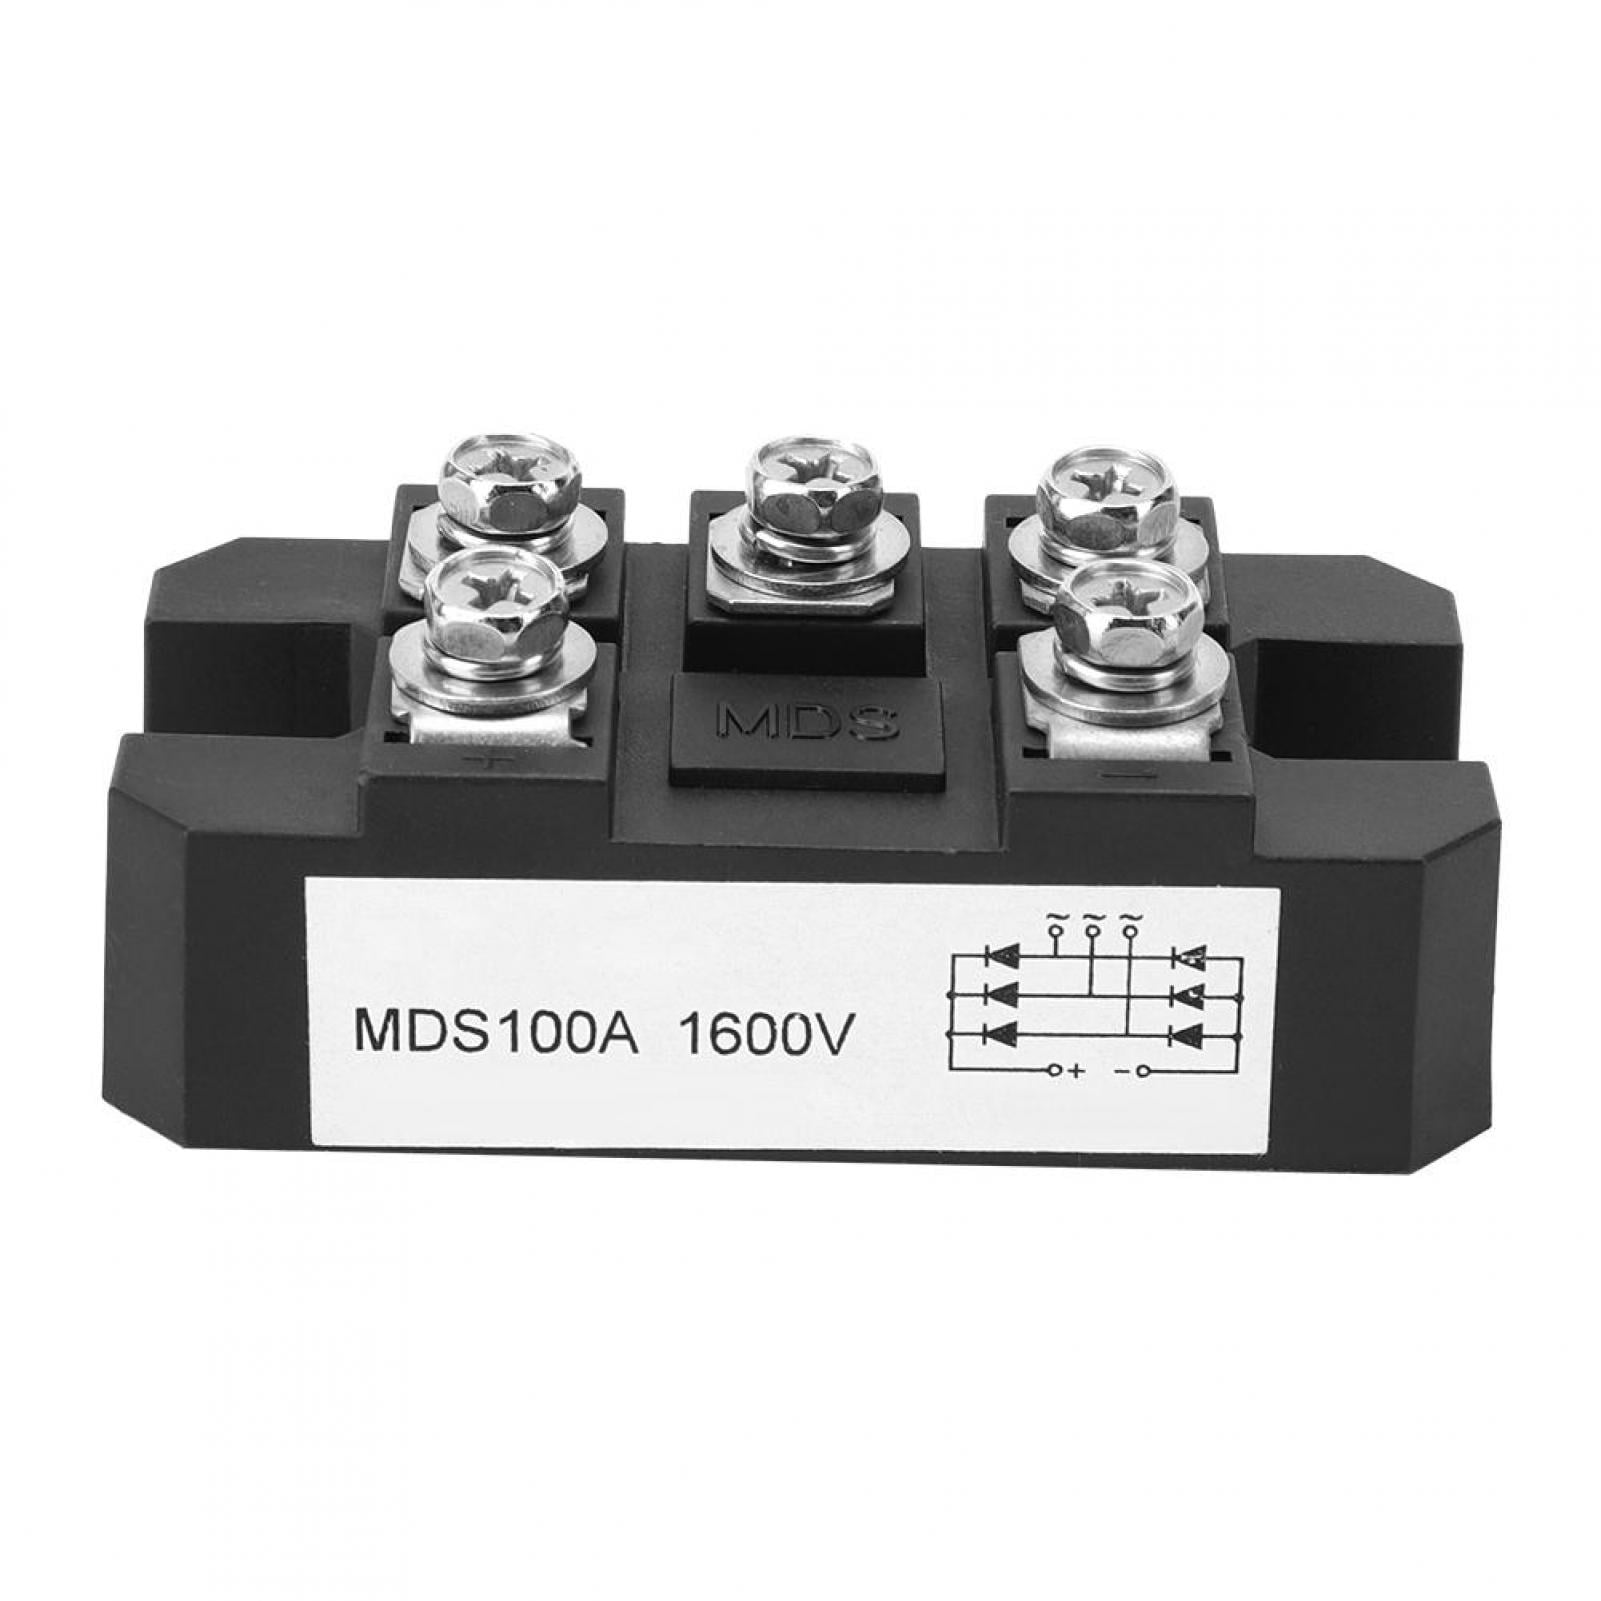 Details about   MDQ 150A 1600V Black Single-Phase Diode Bridge Rectifier 150A Amp High Power 